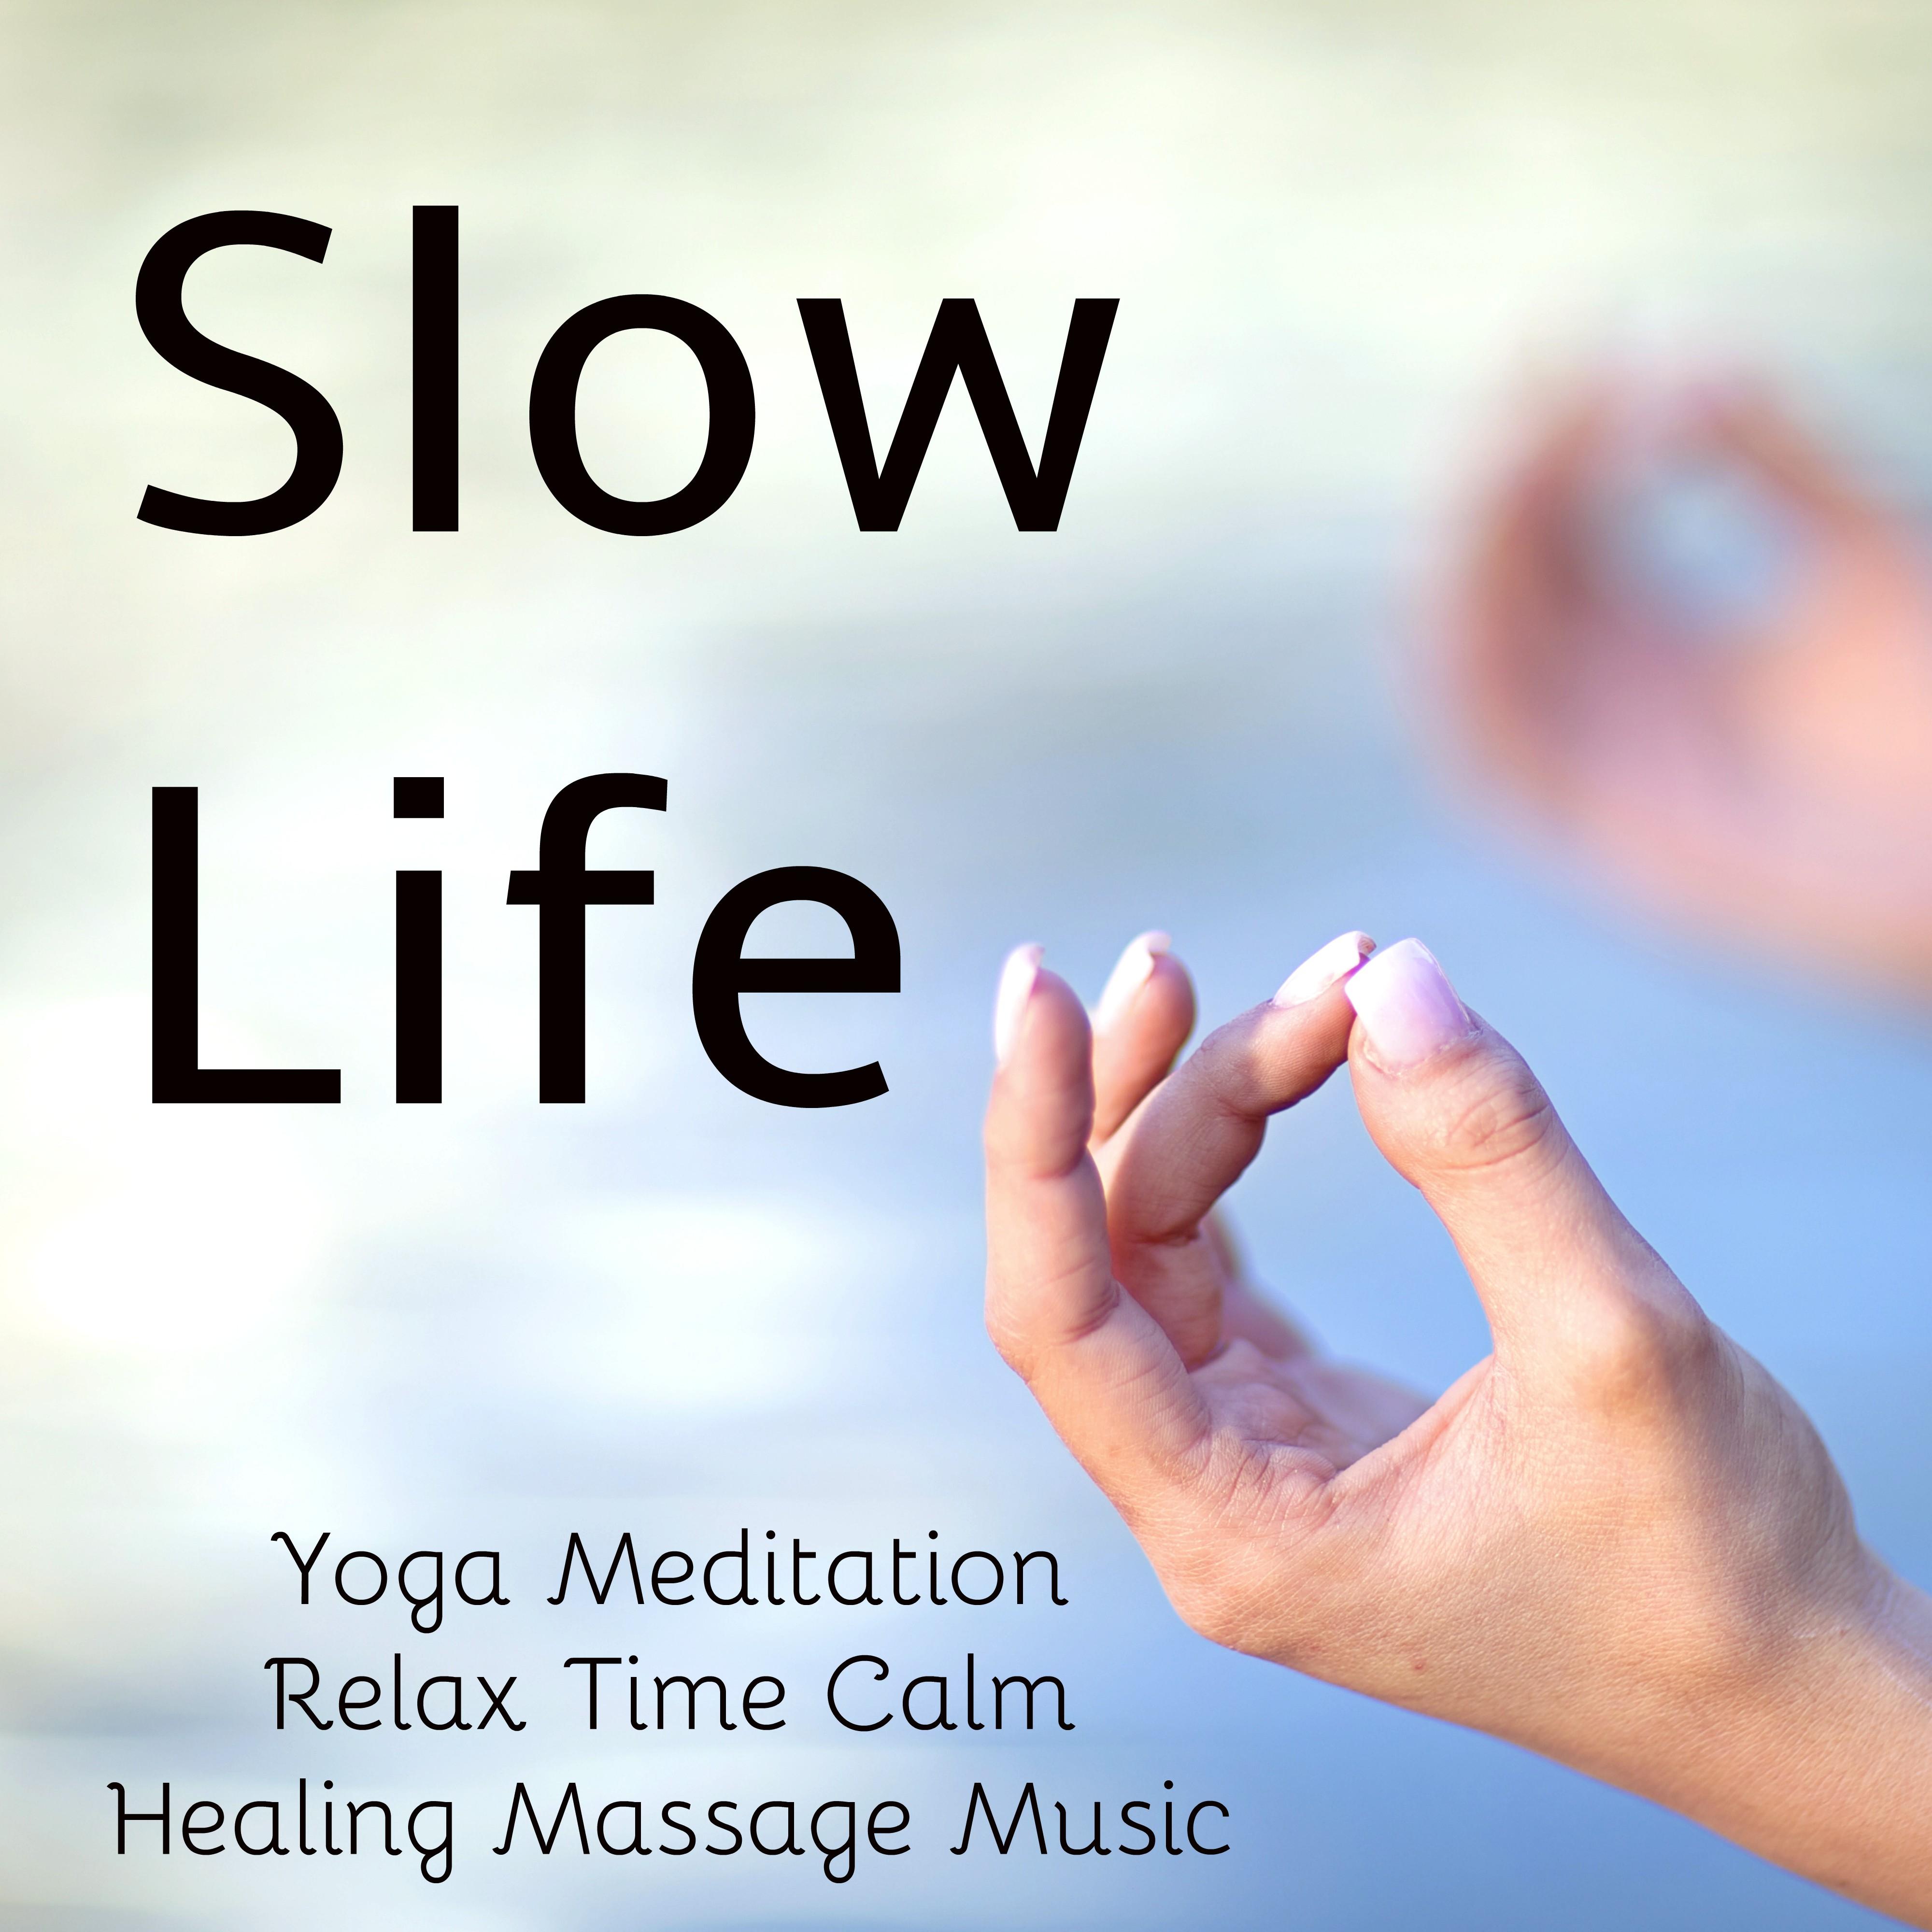 Slow Life - Yoga Meditation Relax Time Healing Massage Calm Music for Stress Relief Chakra Balance and Pranic Energy